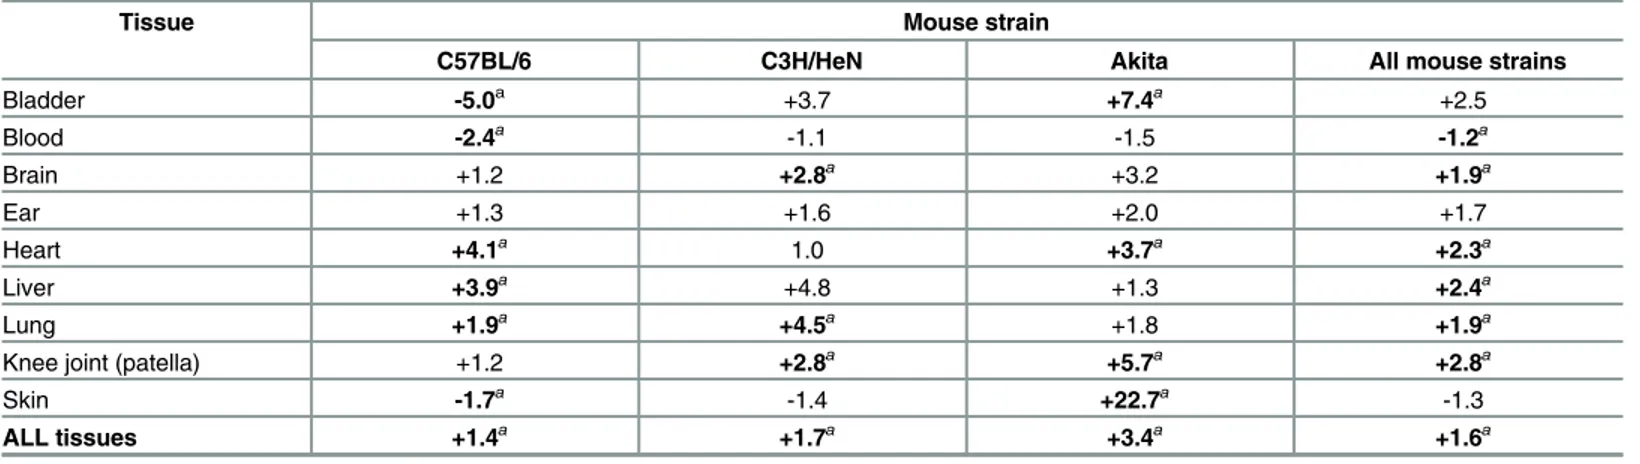 Table 2. Median fold-differences in B. burgdorferi DNA copy number in hyperglycemic vs normoglycemic mice.